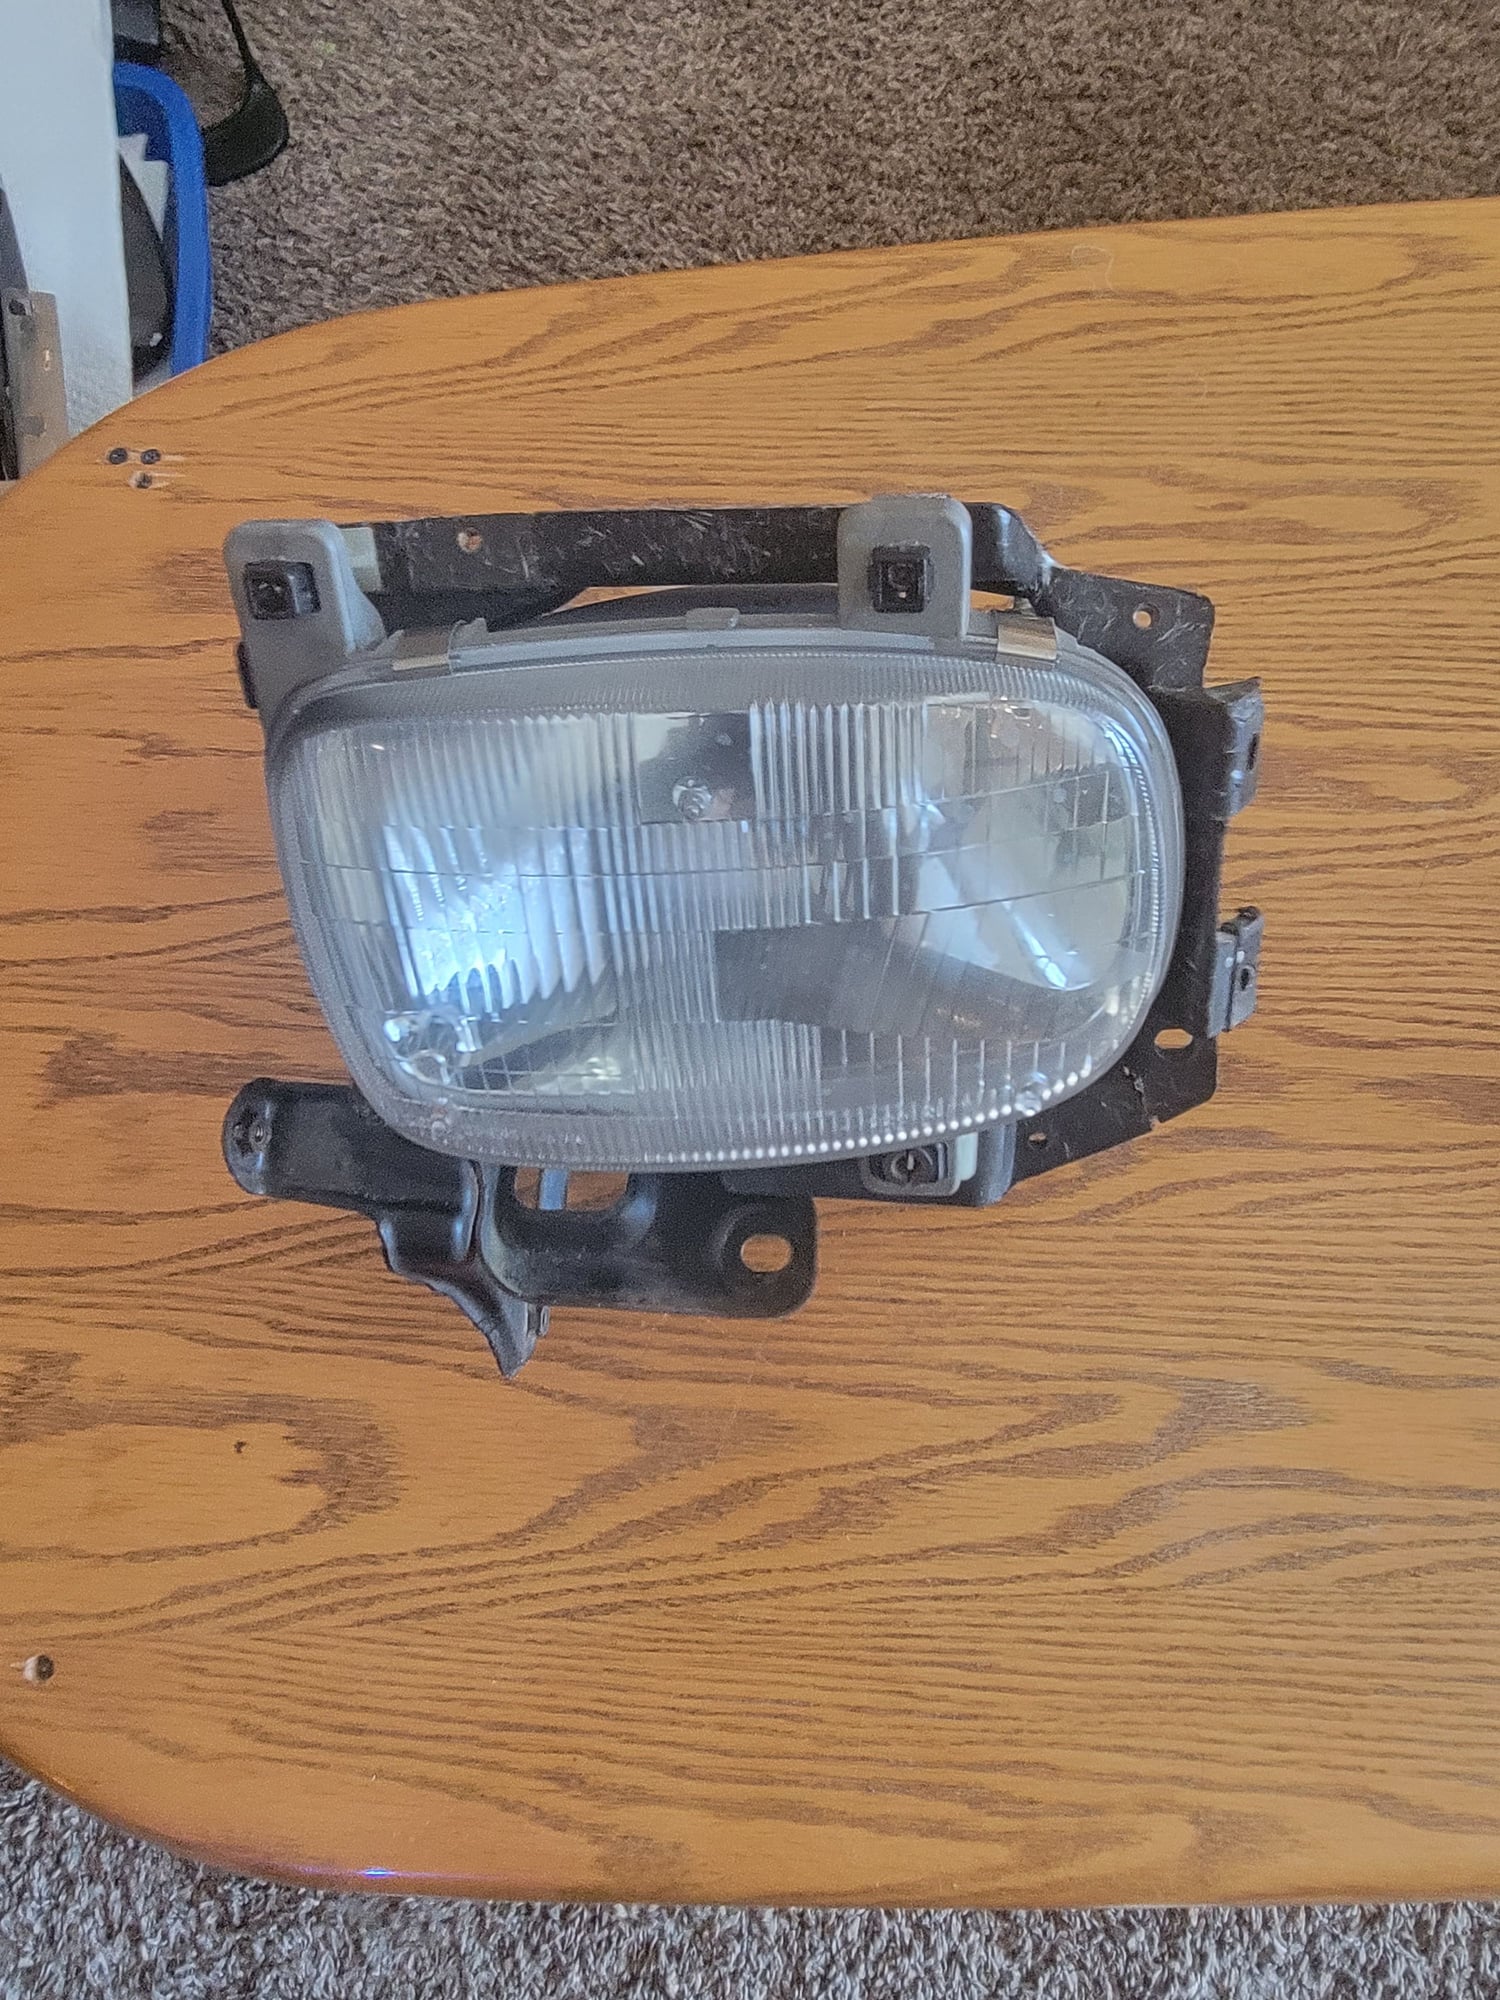 Lights - FD RX7 Diverside (LH) Headlight (Damaged & no motor) - Used - 1992 to 1994 Mazda RX-7 - Muscatine, IA 52761, United States